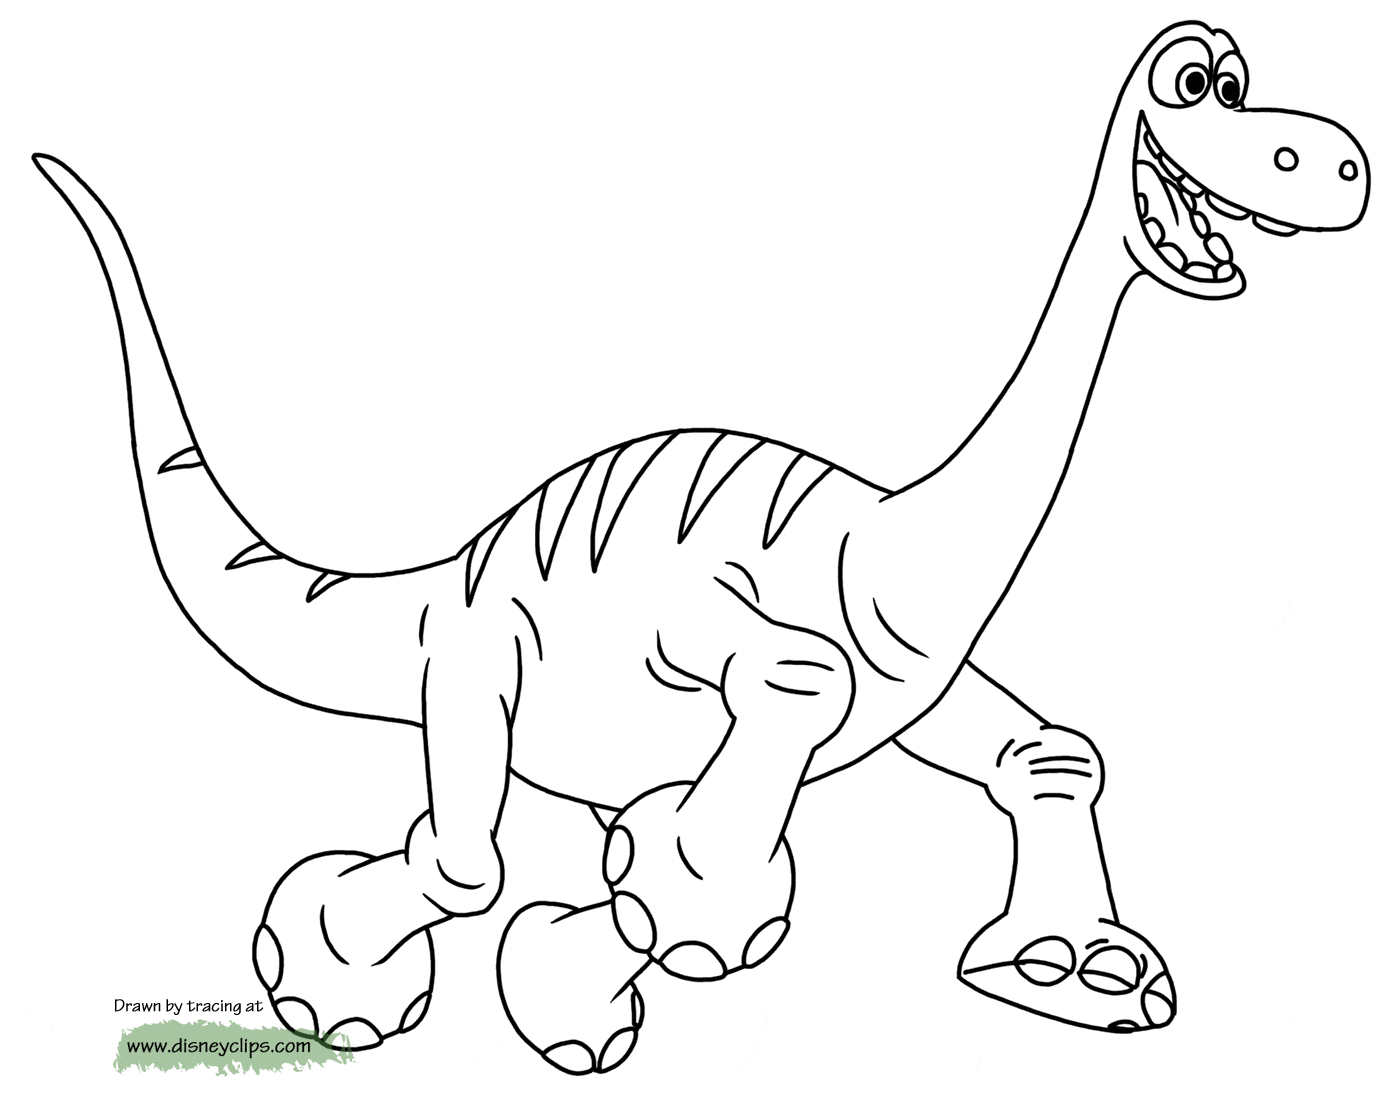 The good dinosaur coloring pages